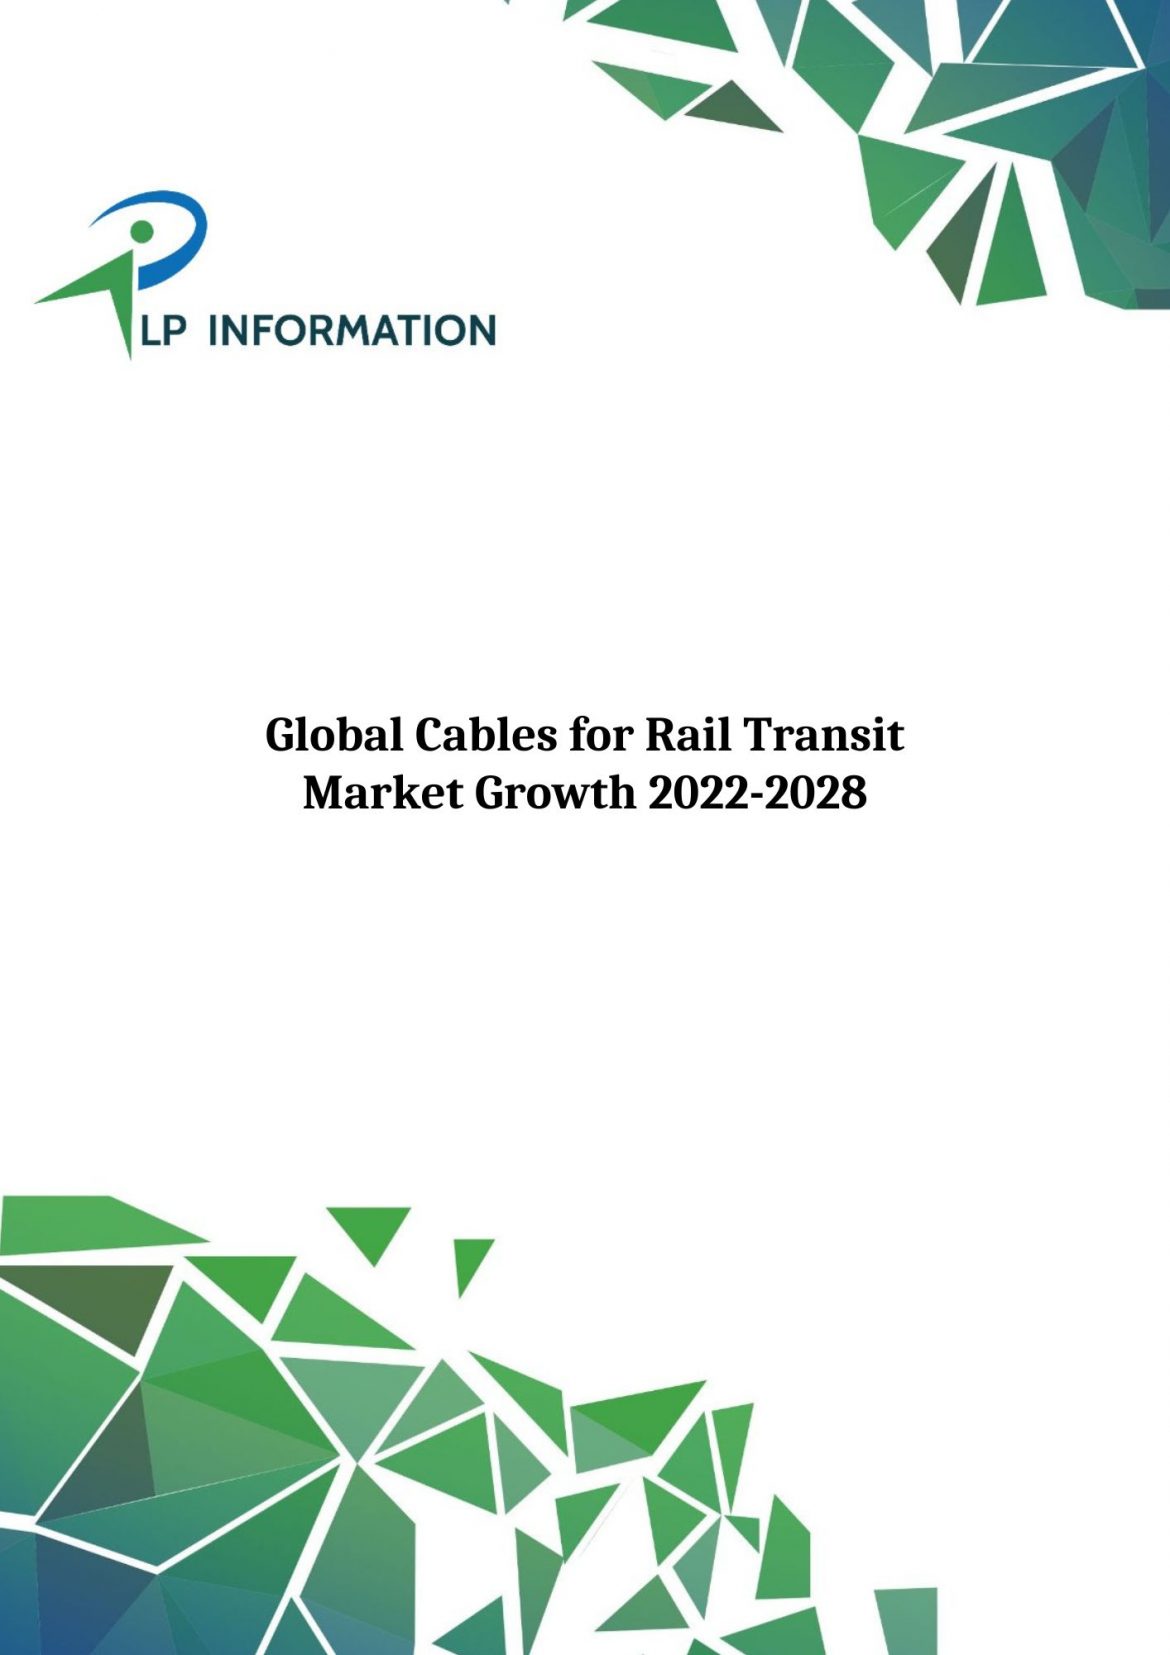 Global Cables for Rail Transit Market Growth 2022-2028